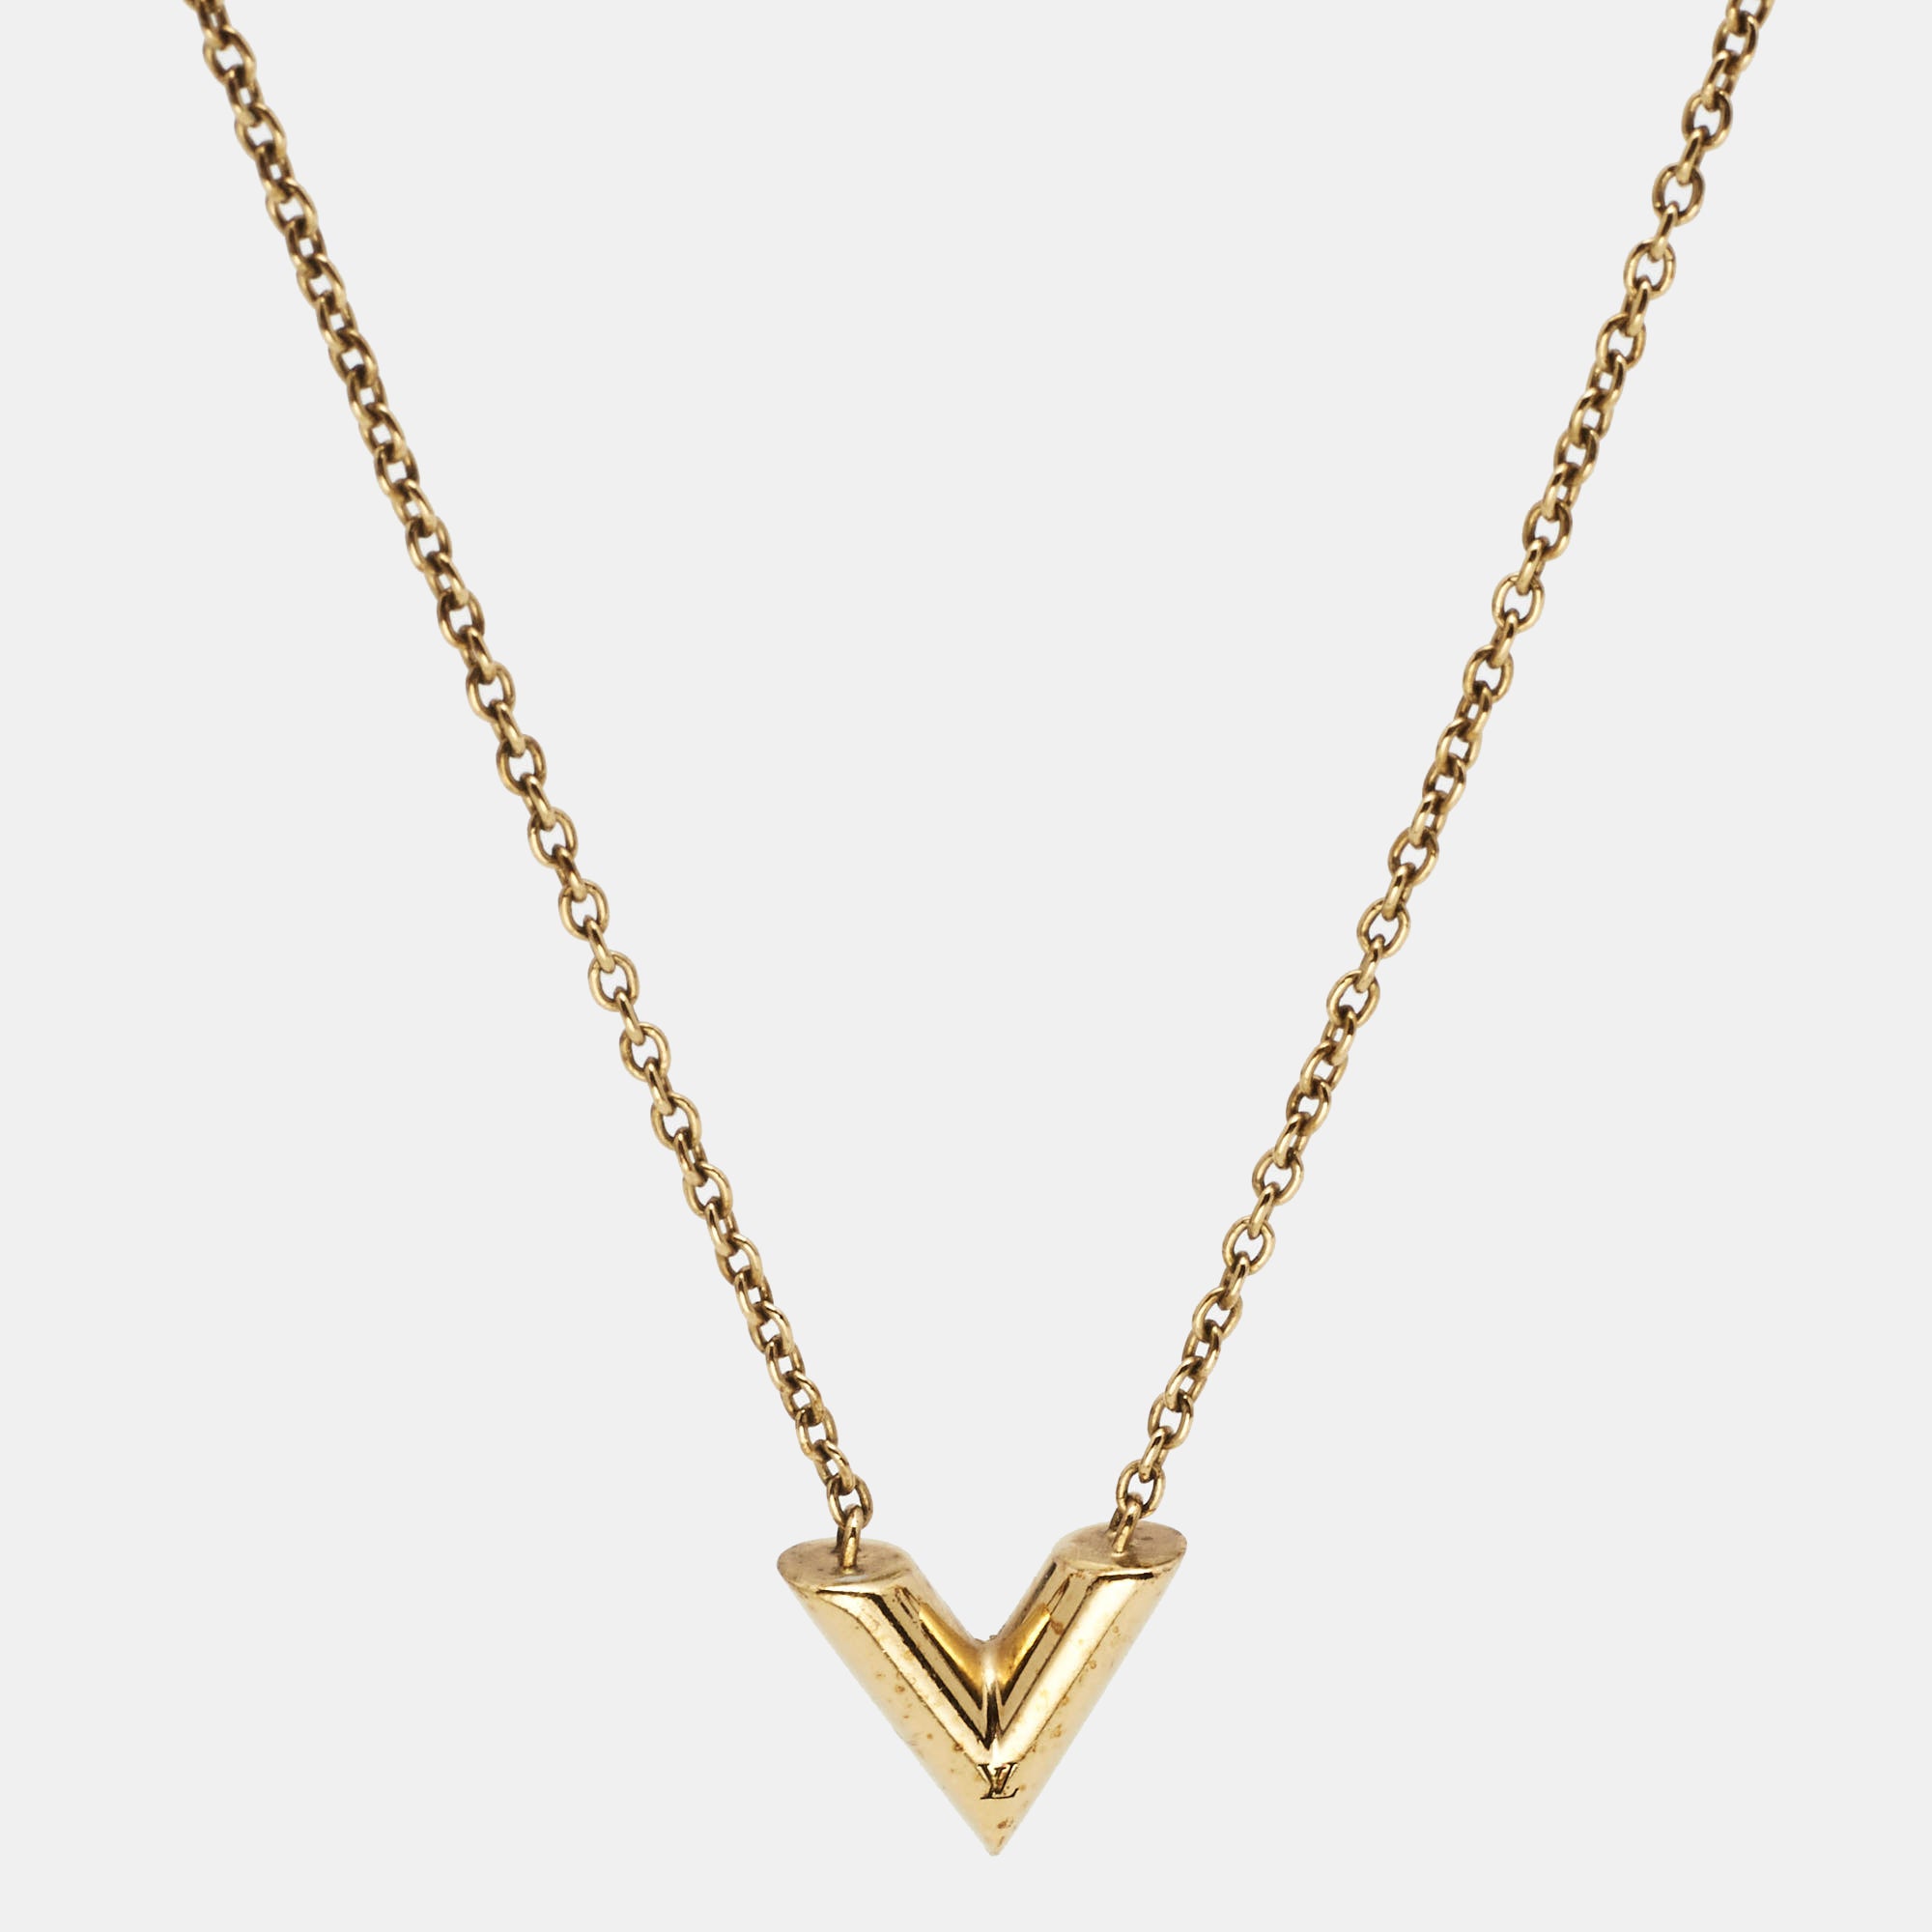 Louis Vuitton Essential V Necklace ❤ liked on Polyvore featuring